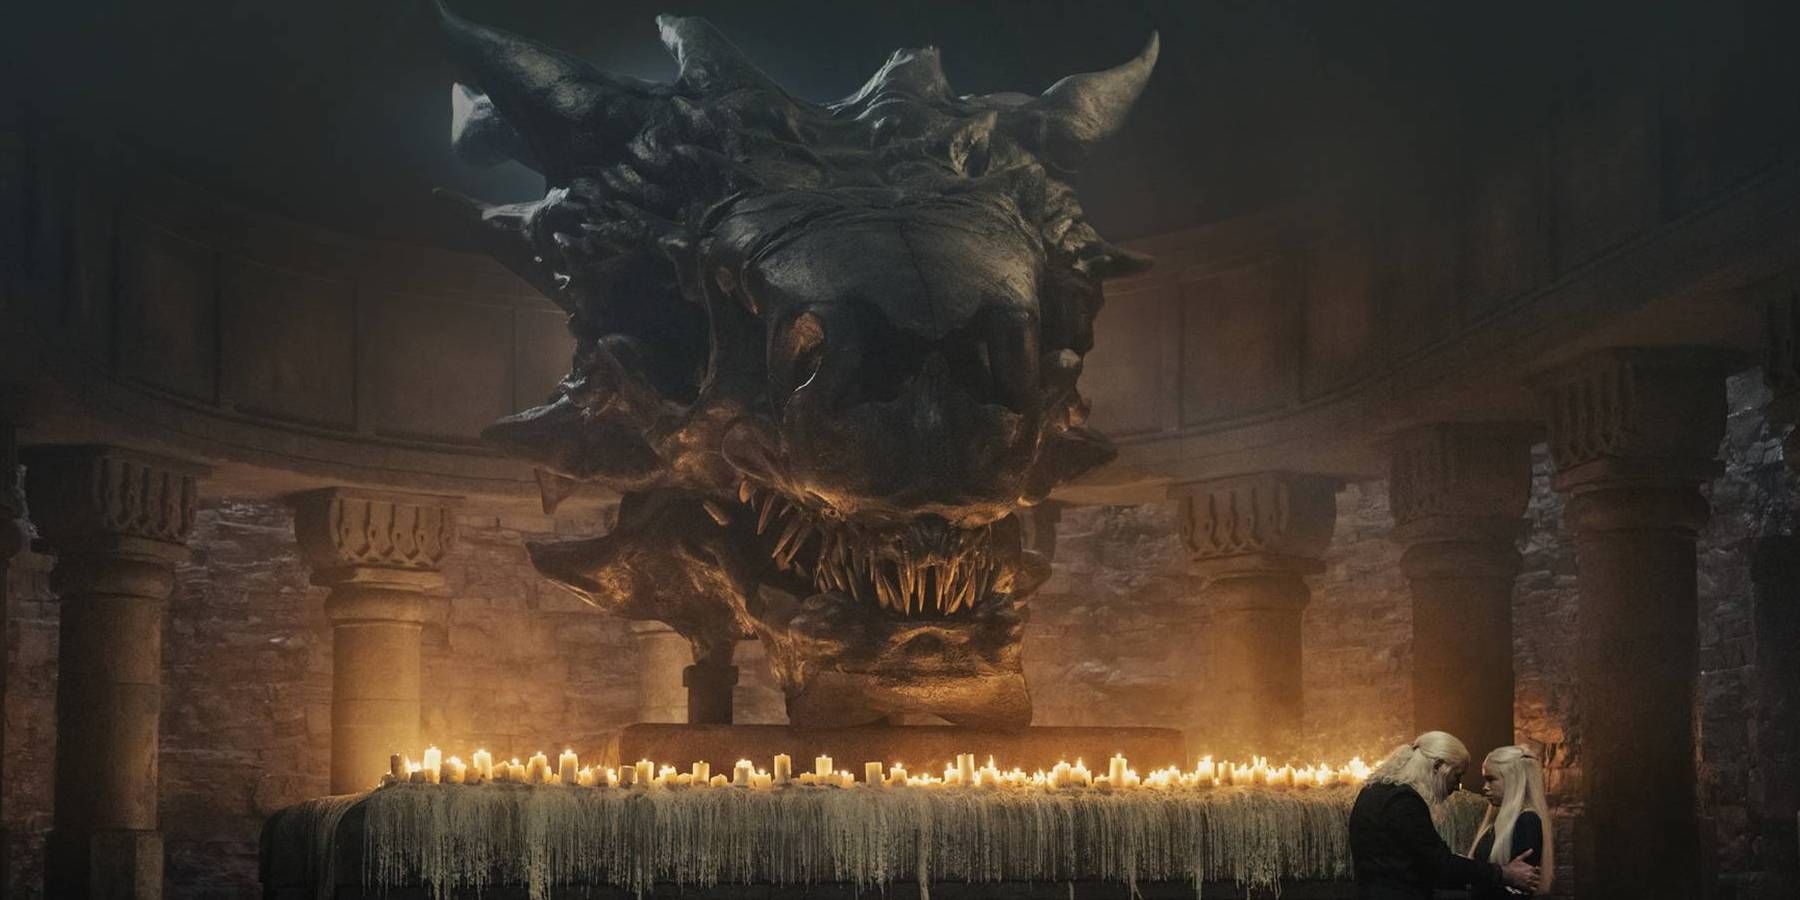 Viserys and Rhaenyra stand in front of Balerion's skull in House of the Dragon.